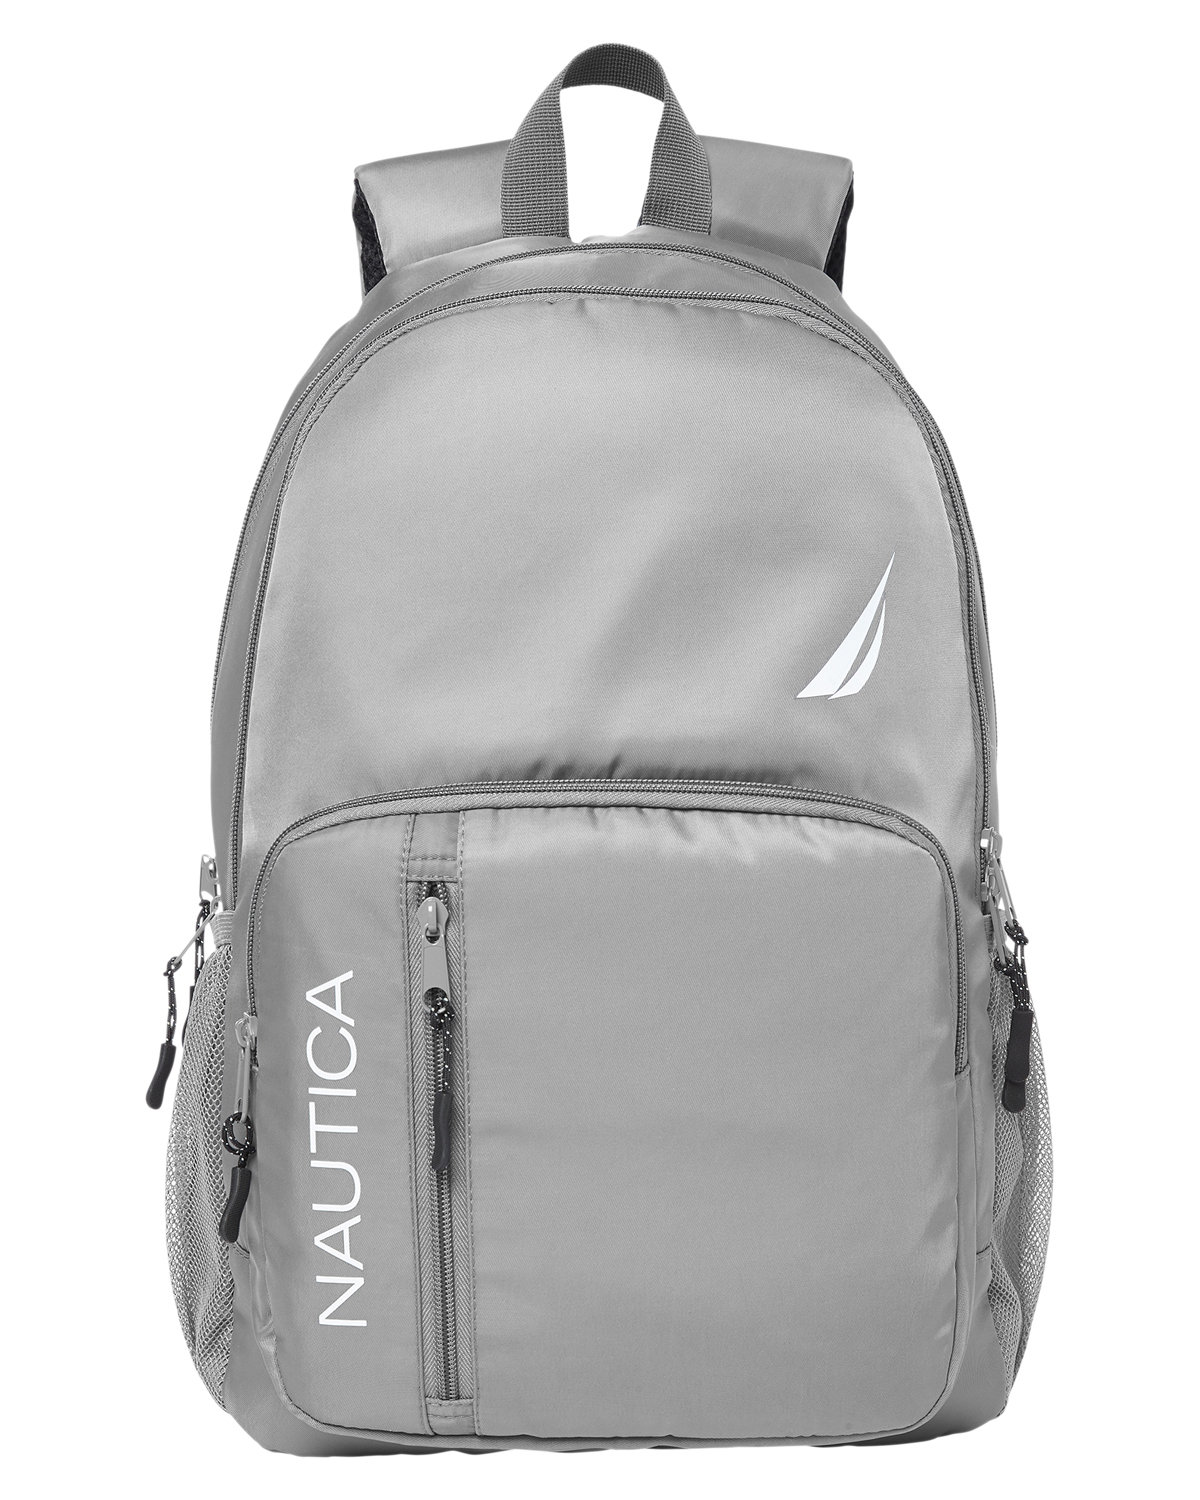 Nautica Hold Fast Backpack GRAPHITE 